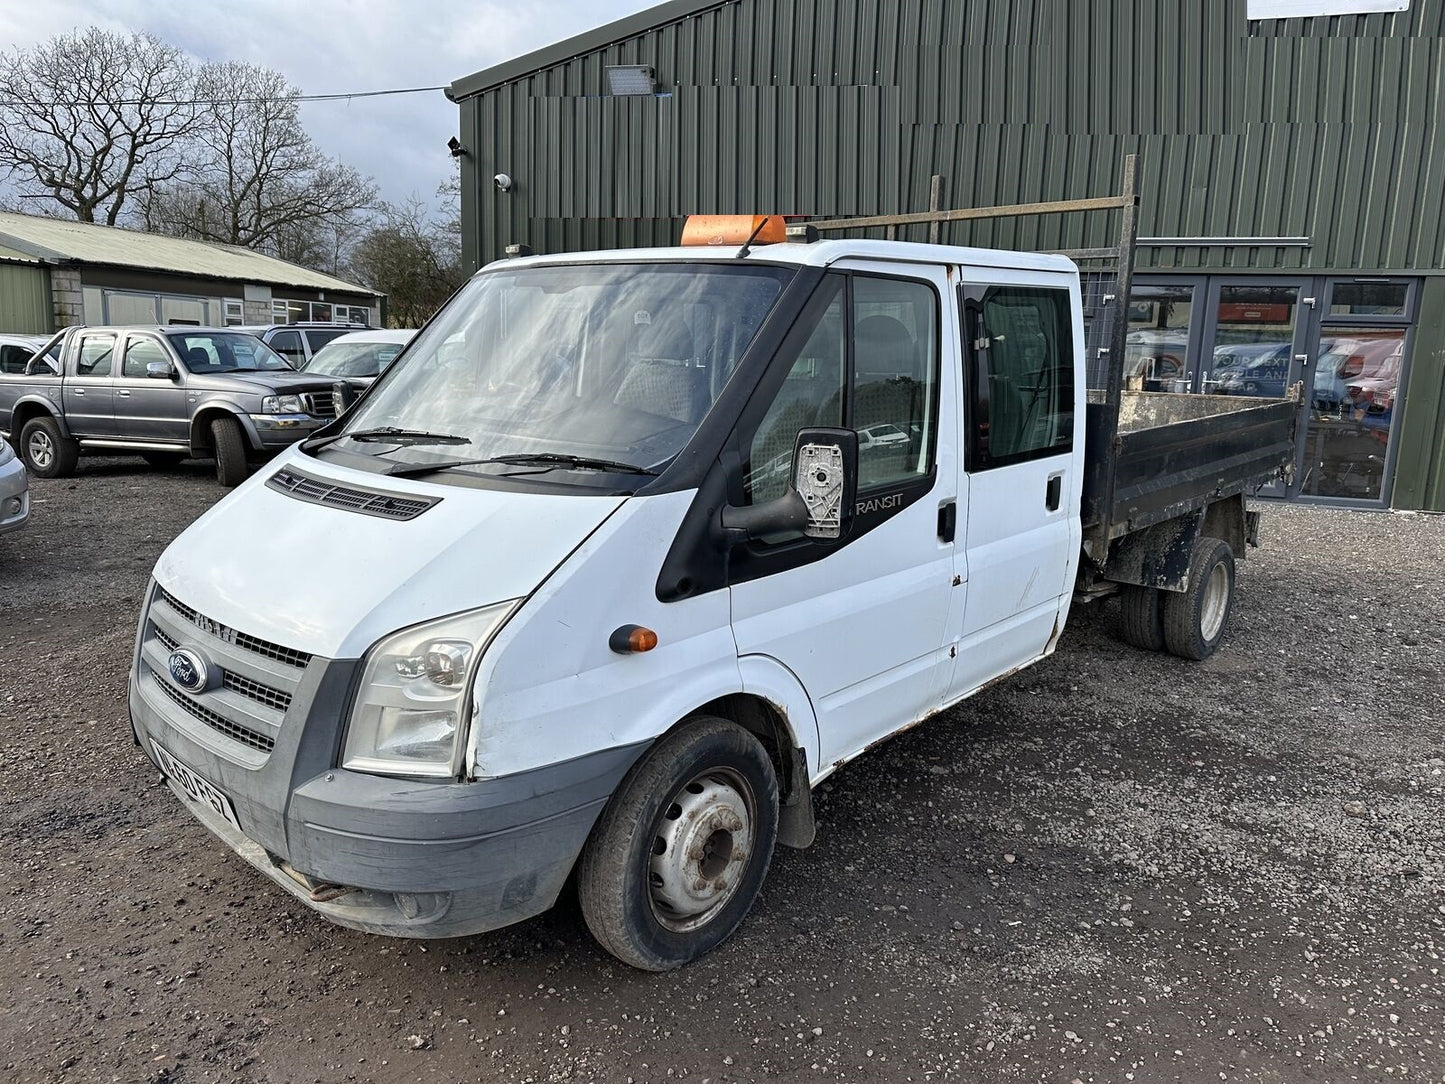 FORD TRANSIT TIPPER: BUILT TOUGH, READY FOR HEAVY LOADS >>--NO VAT ON HAMMER--<<